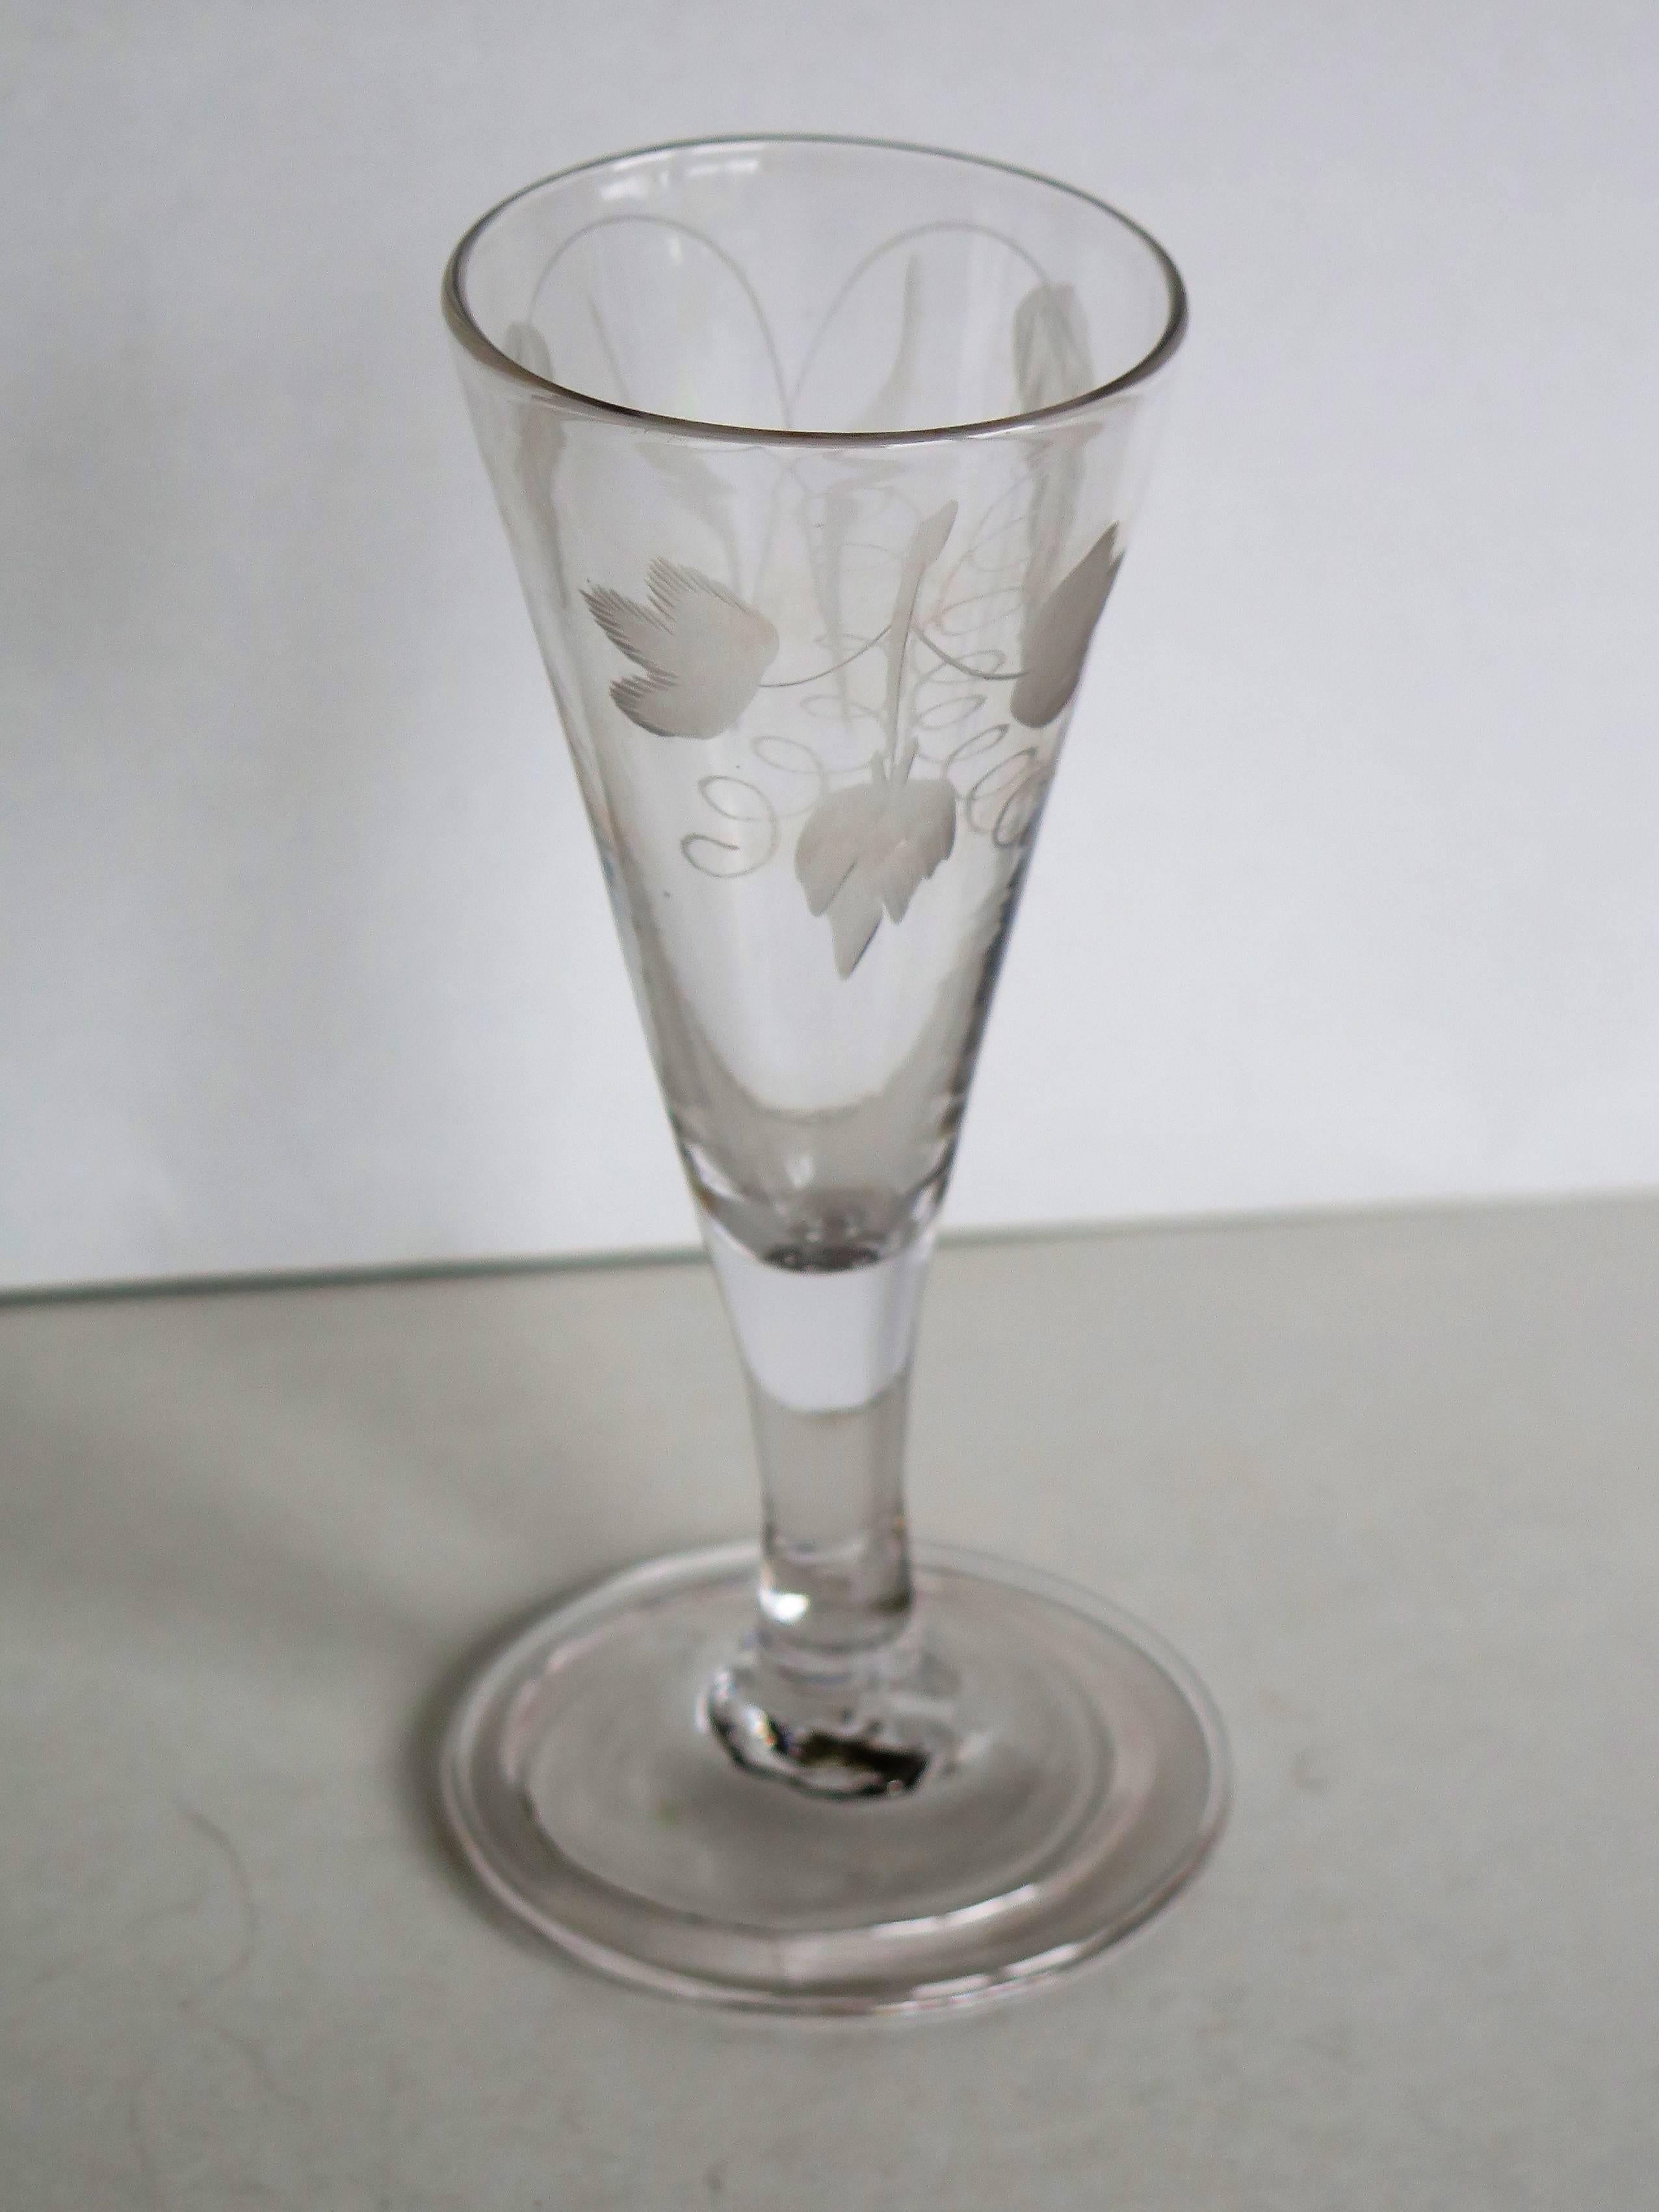 English Mid-Georgian Ale Drinking Glass Handblown Engraved with Hops and Barley, Ca 1750